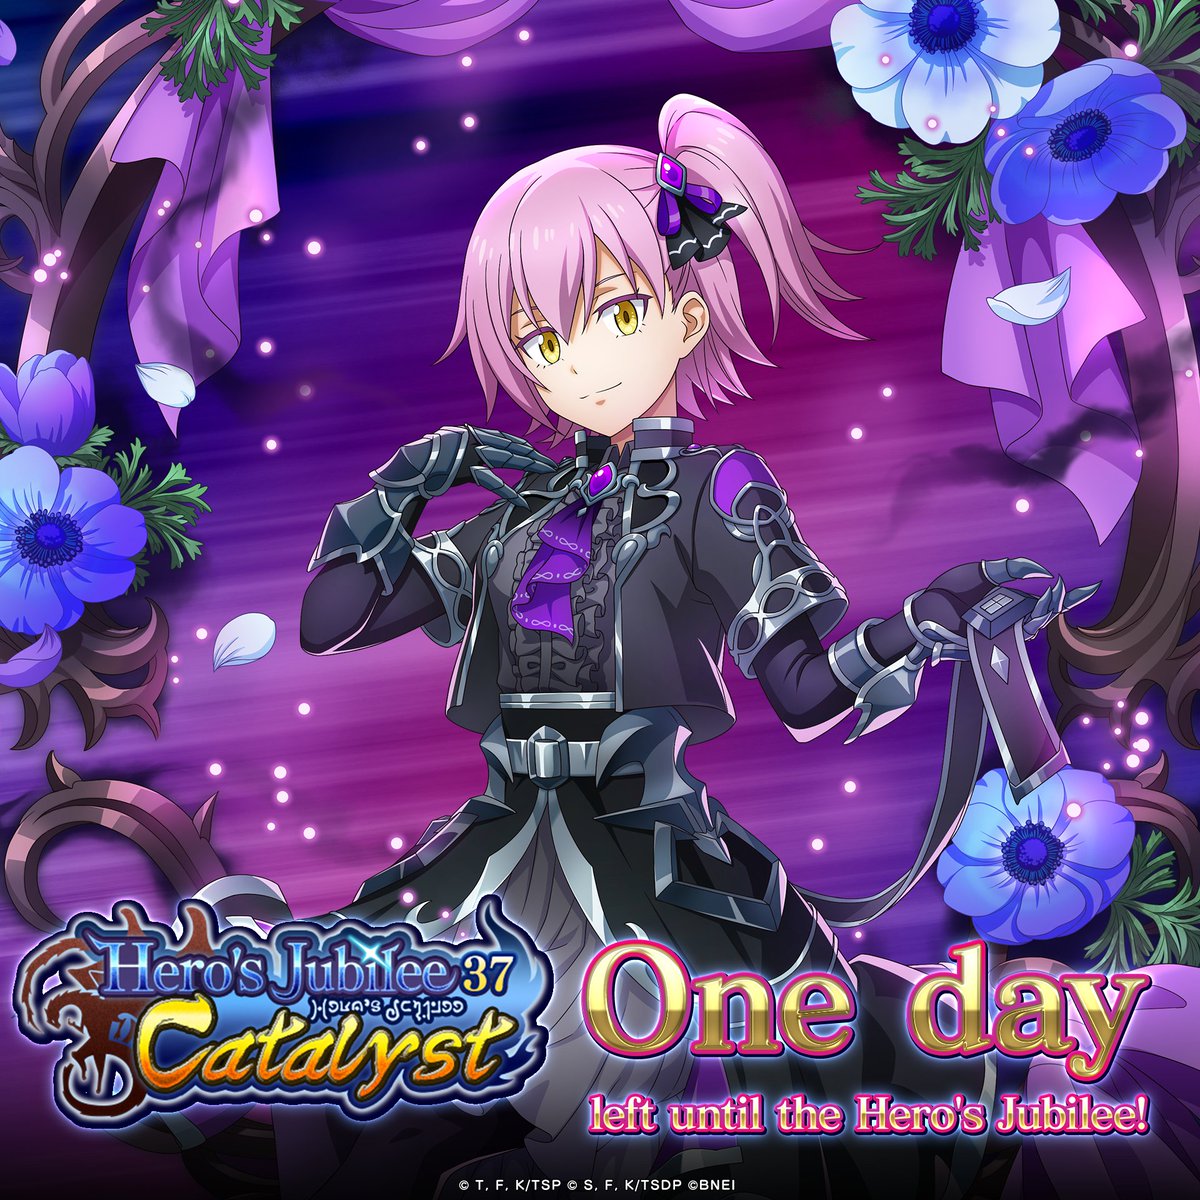 Events Starting 2:00 UTC 4/16 (Tue)!🎉

New Event! Hero's Jubilee 37: Catalyst👏

Use as many skills as possible and clear the battles!💥

#SlimeIM #tensura